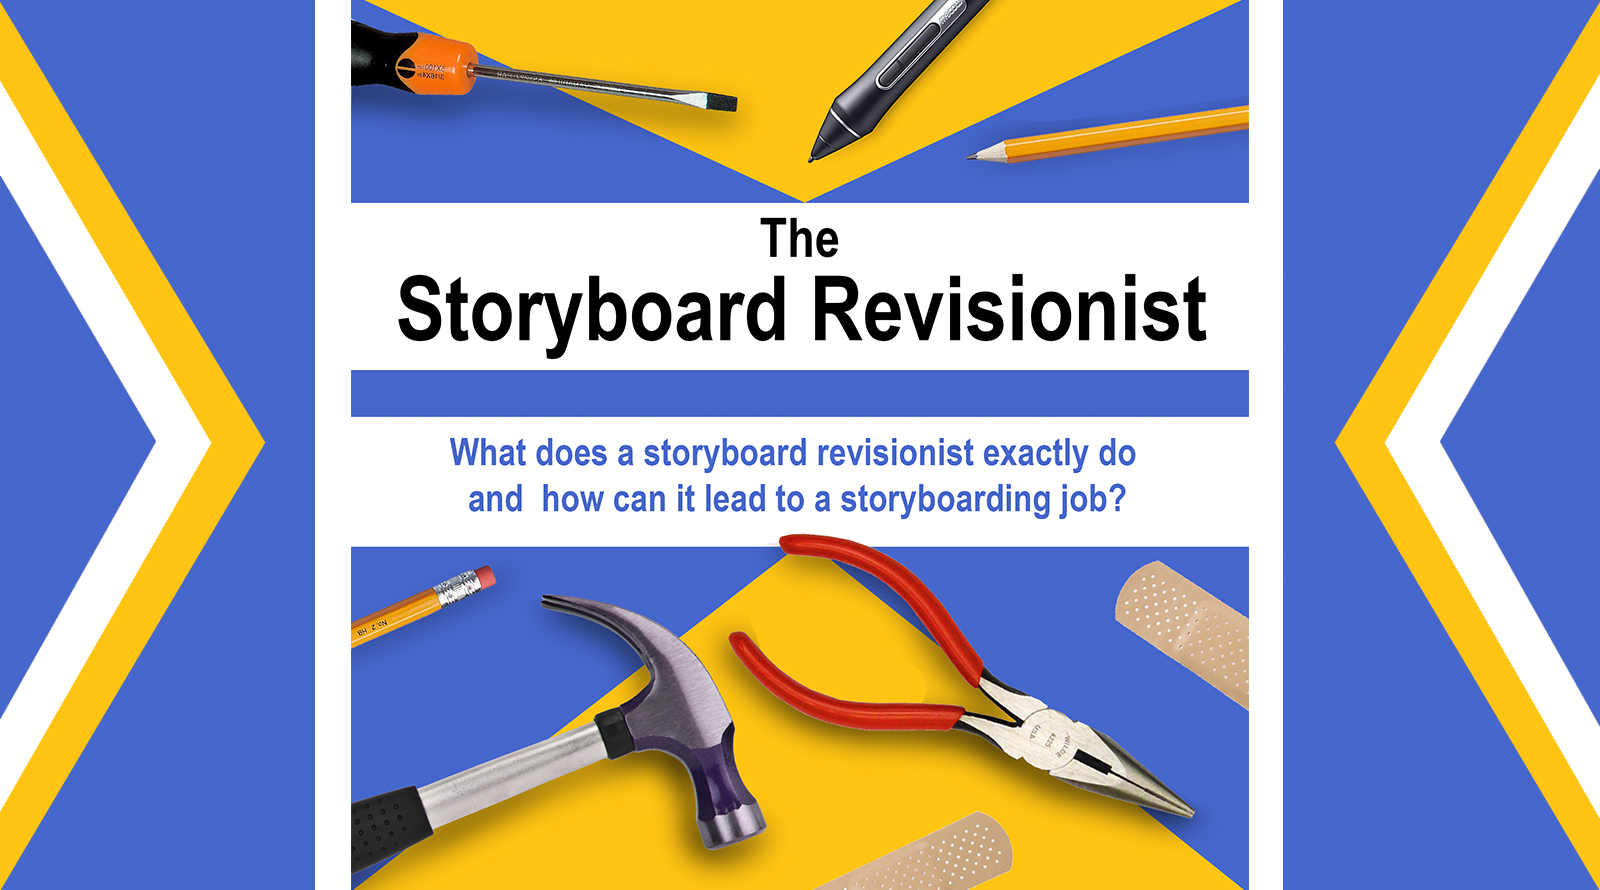 The Storyboard Revisionist